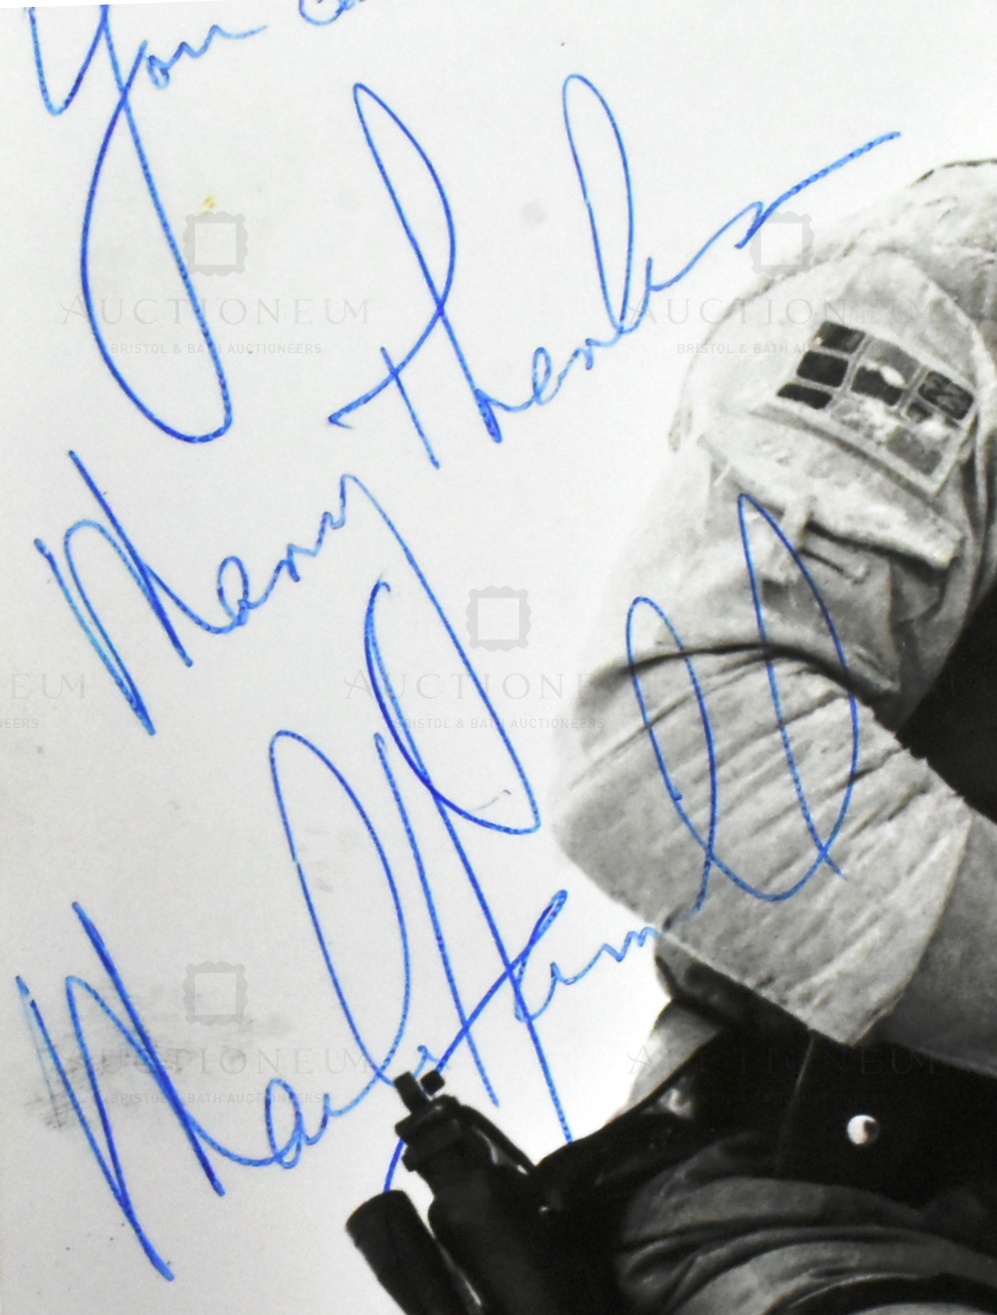 STAR WARS - MARK HAMILL - AUTOGRAPHED PHOTOGRAPH TO ASST. DIRECTOR - Image 3 of 4